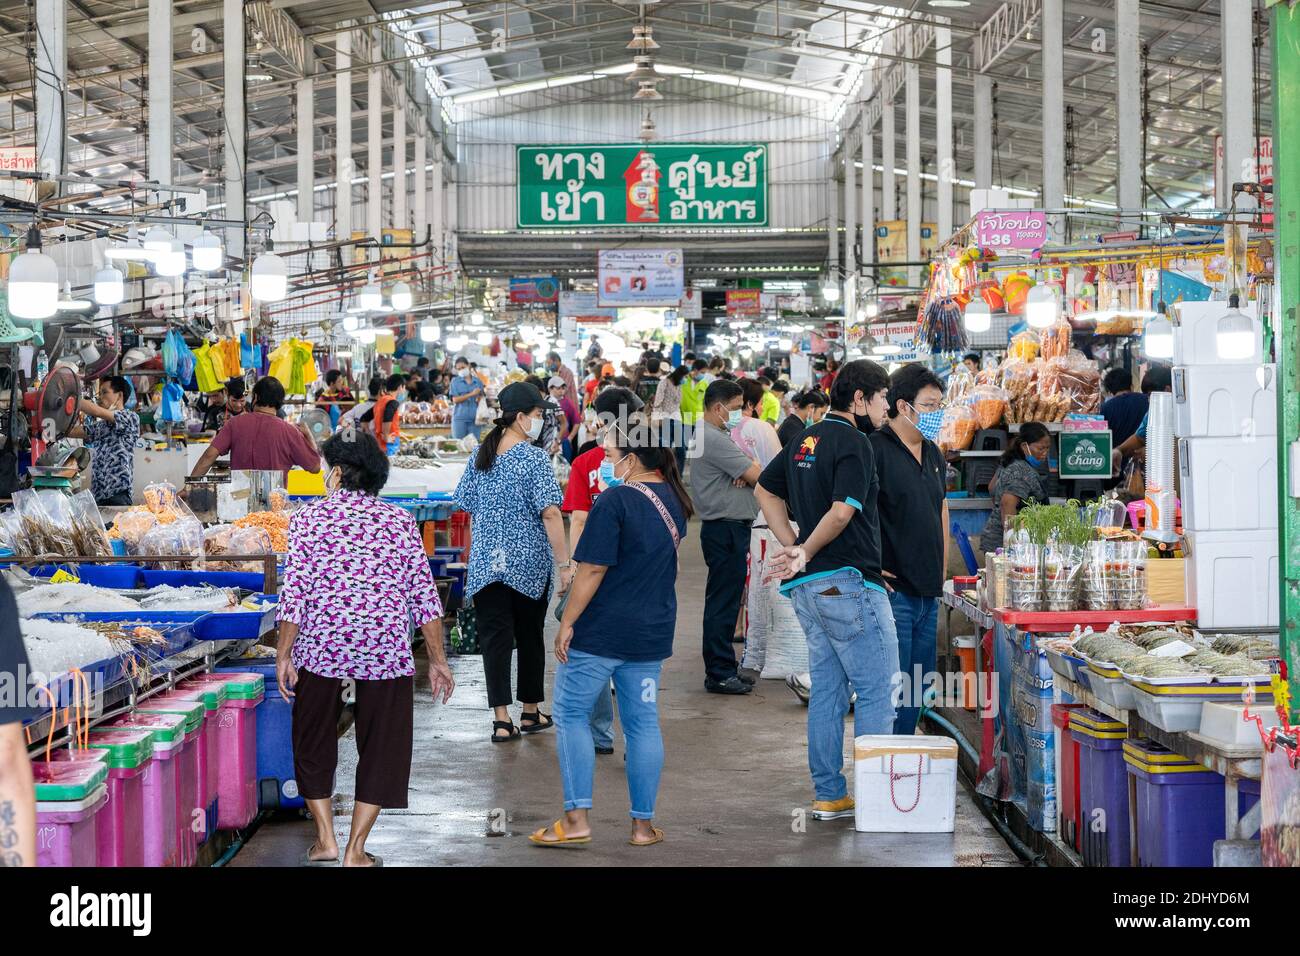 Chonburi Province, Thailand - 25 Sep 2020, Asian Local People walk and shop seafood at the Angsila fish market, the large fresh market in Chonburi Pro Stock Photo